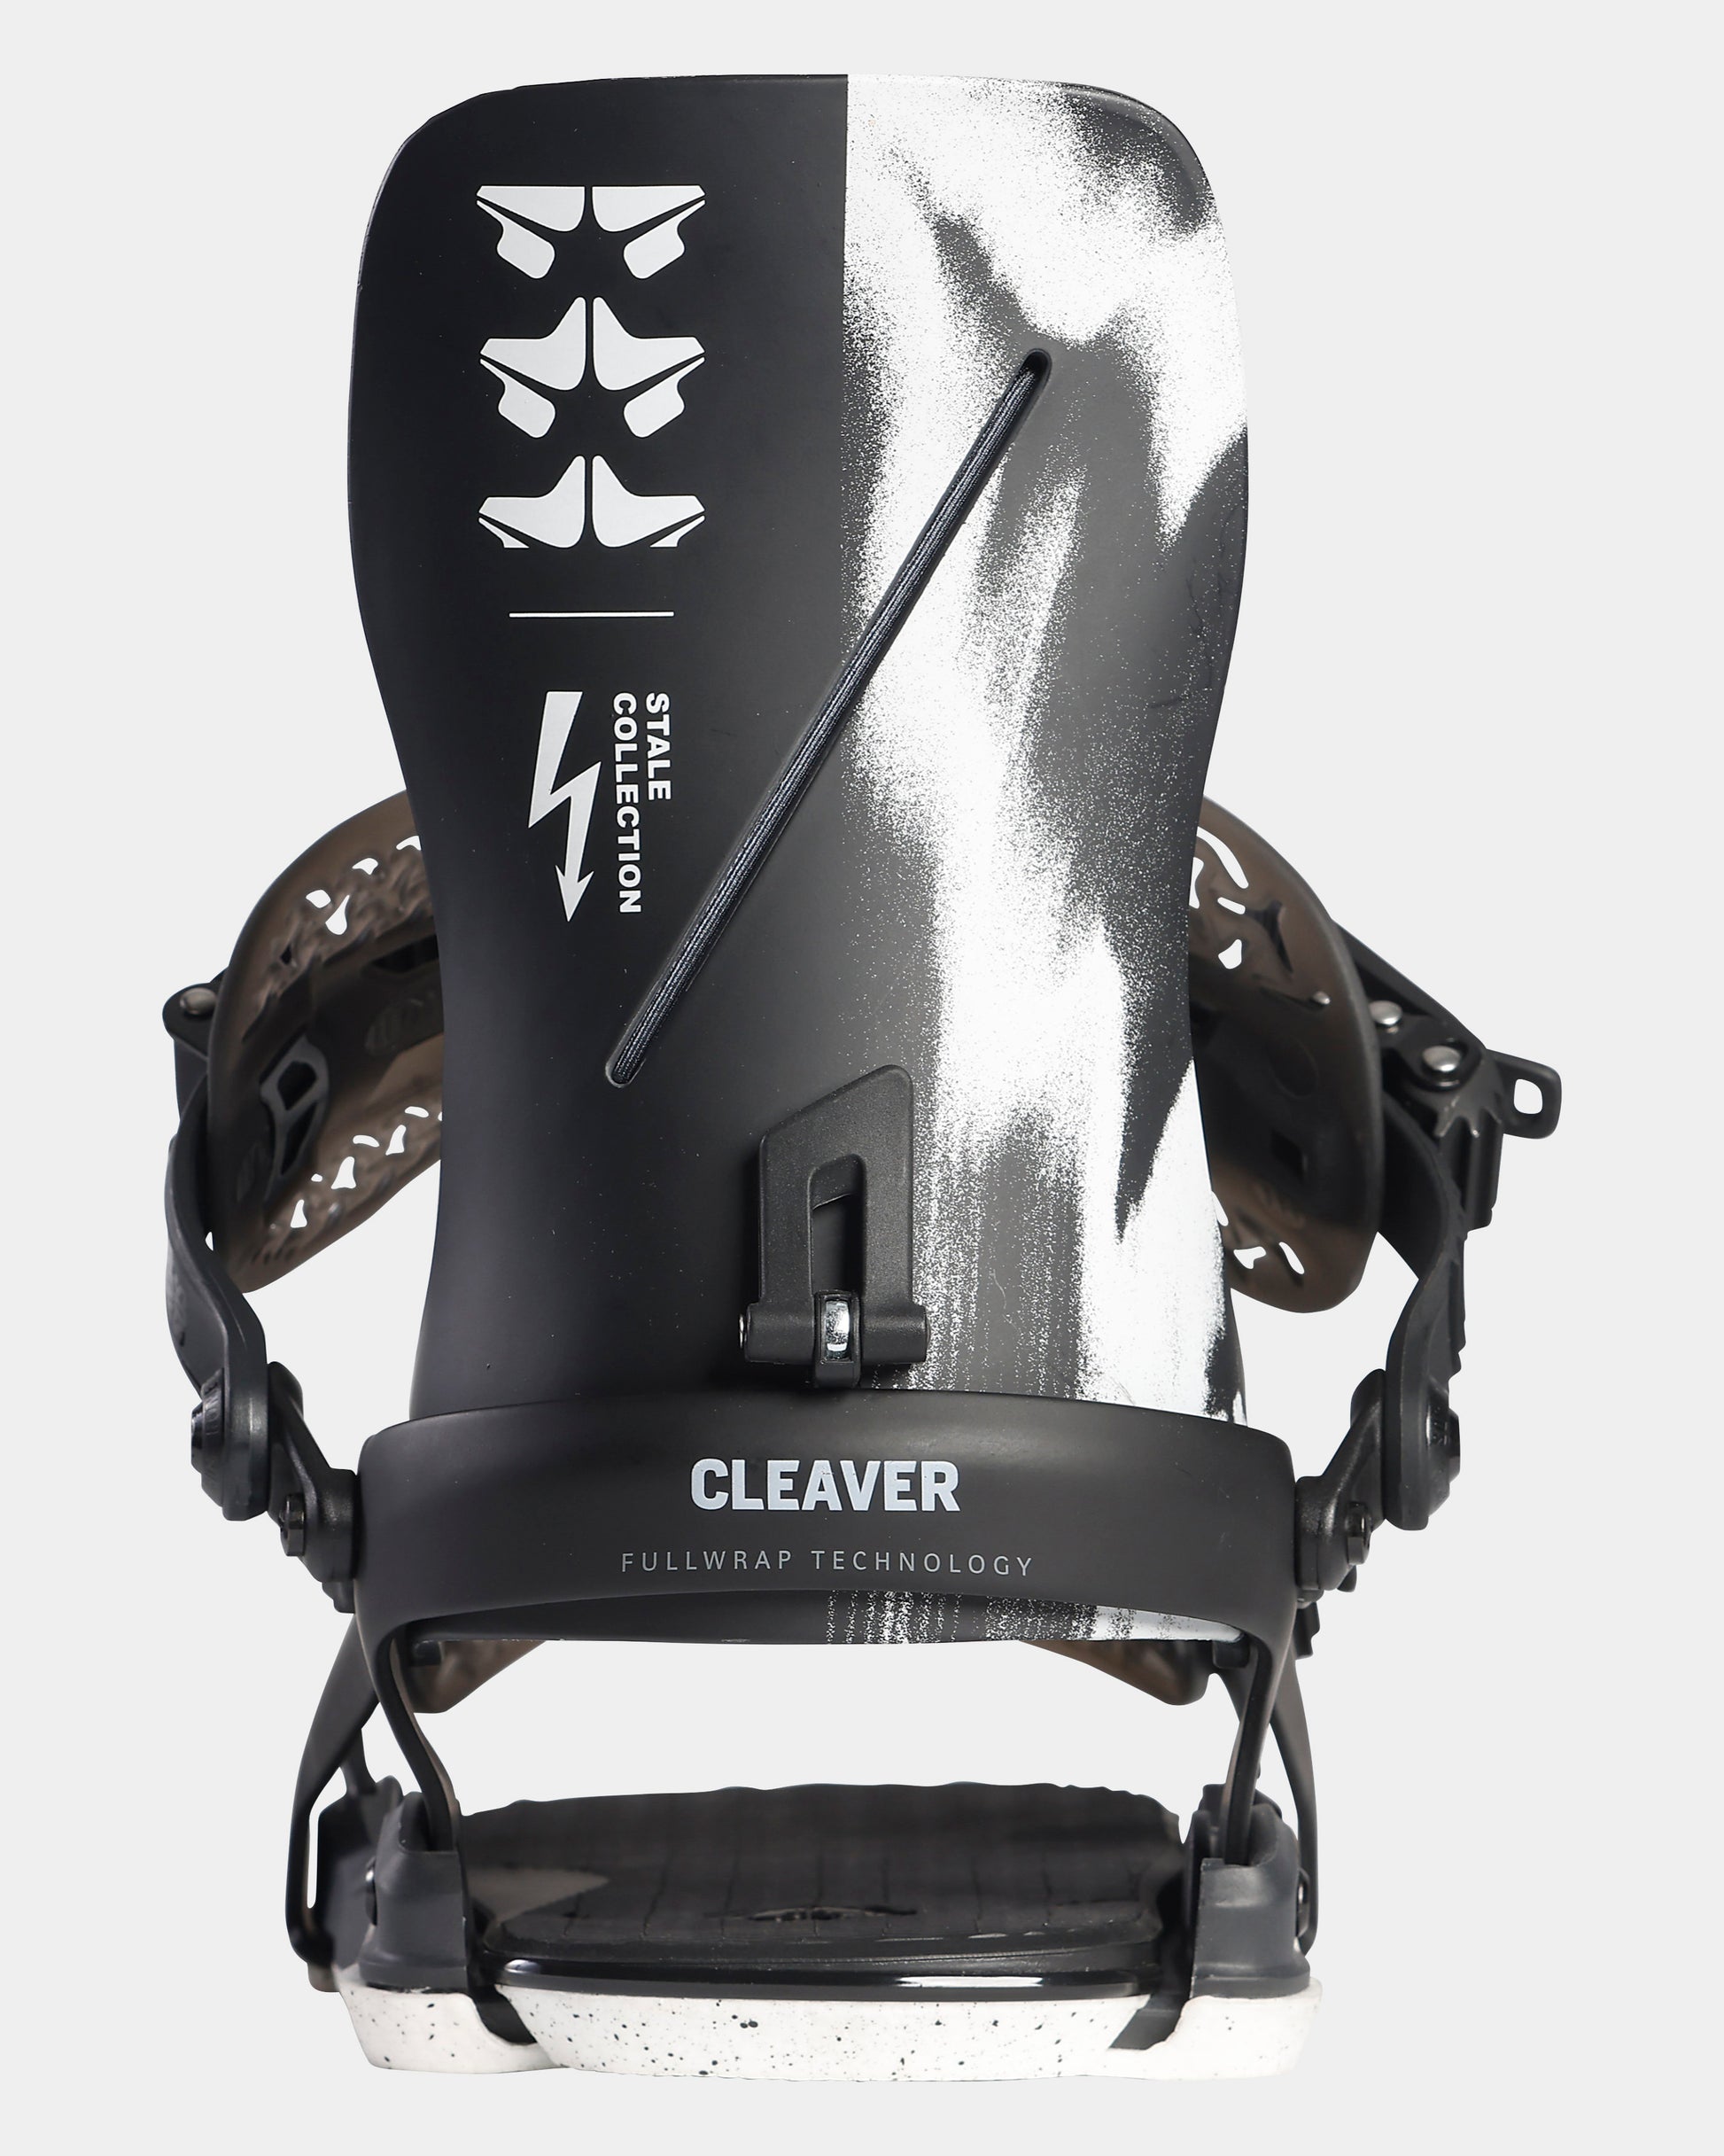 rome cleaver bindings 2022 mens snowboard bindings product photo from back cover shot in studio color stale